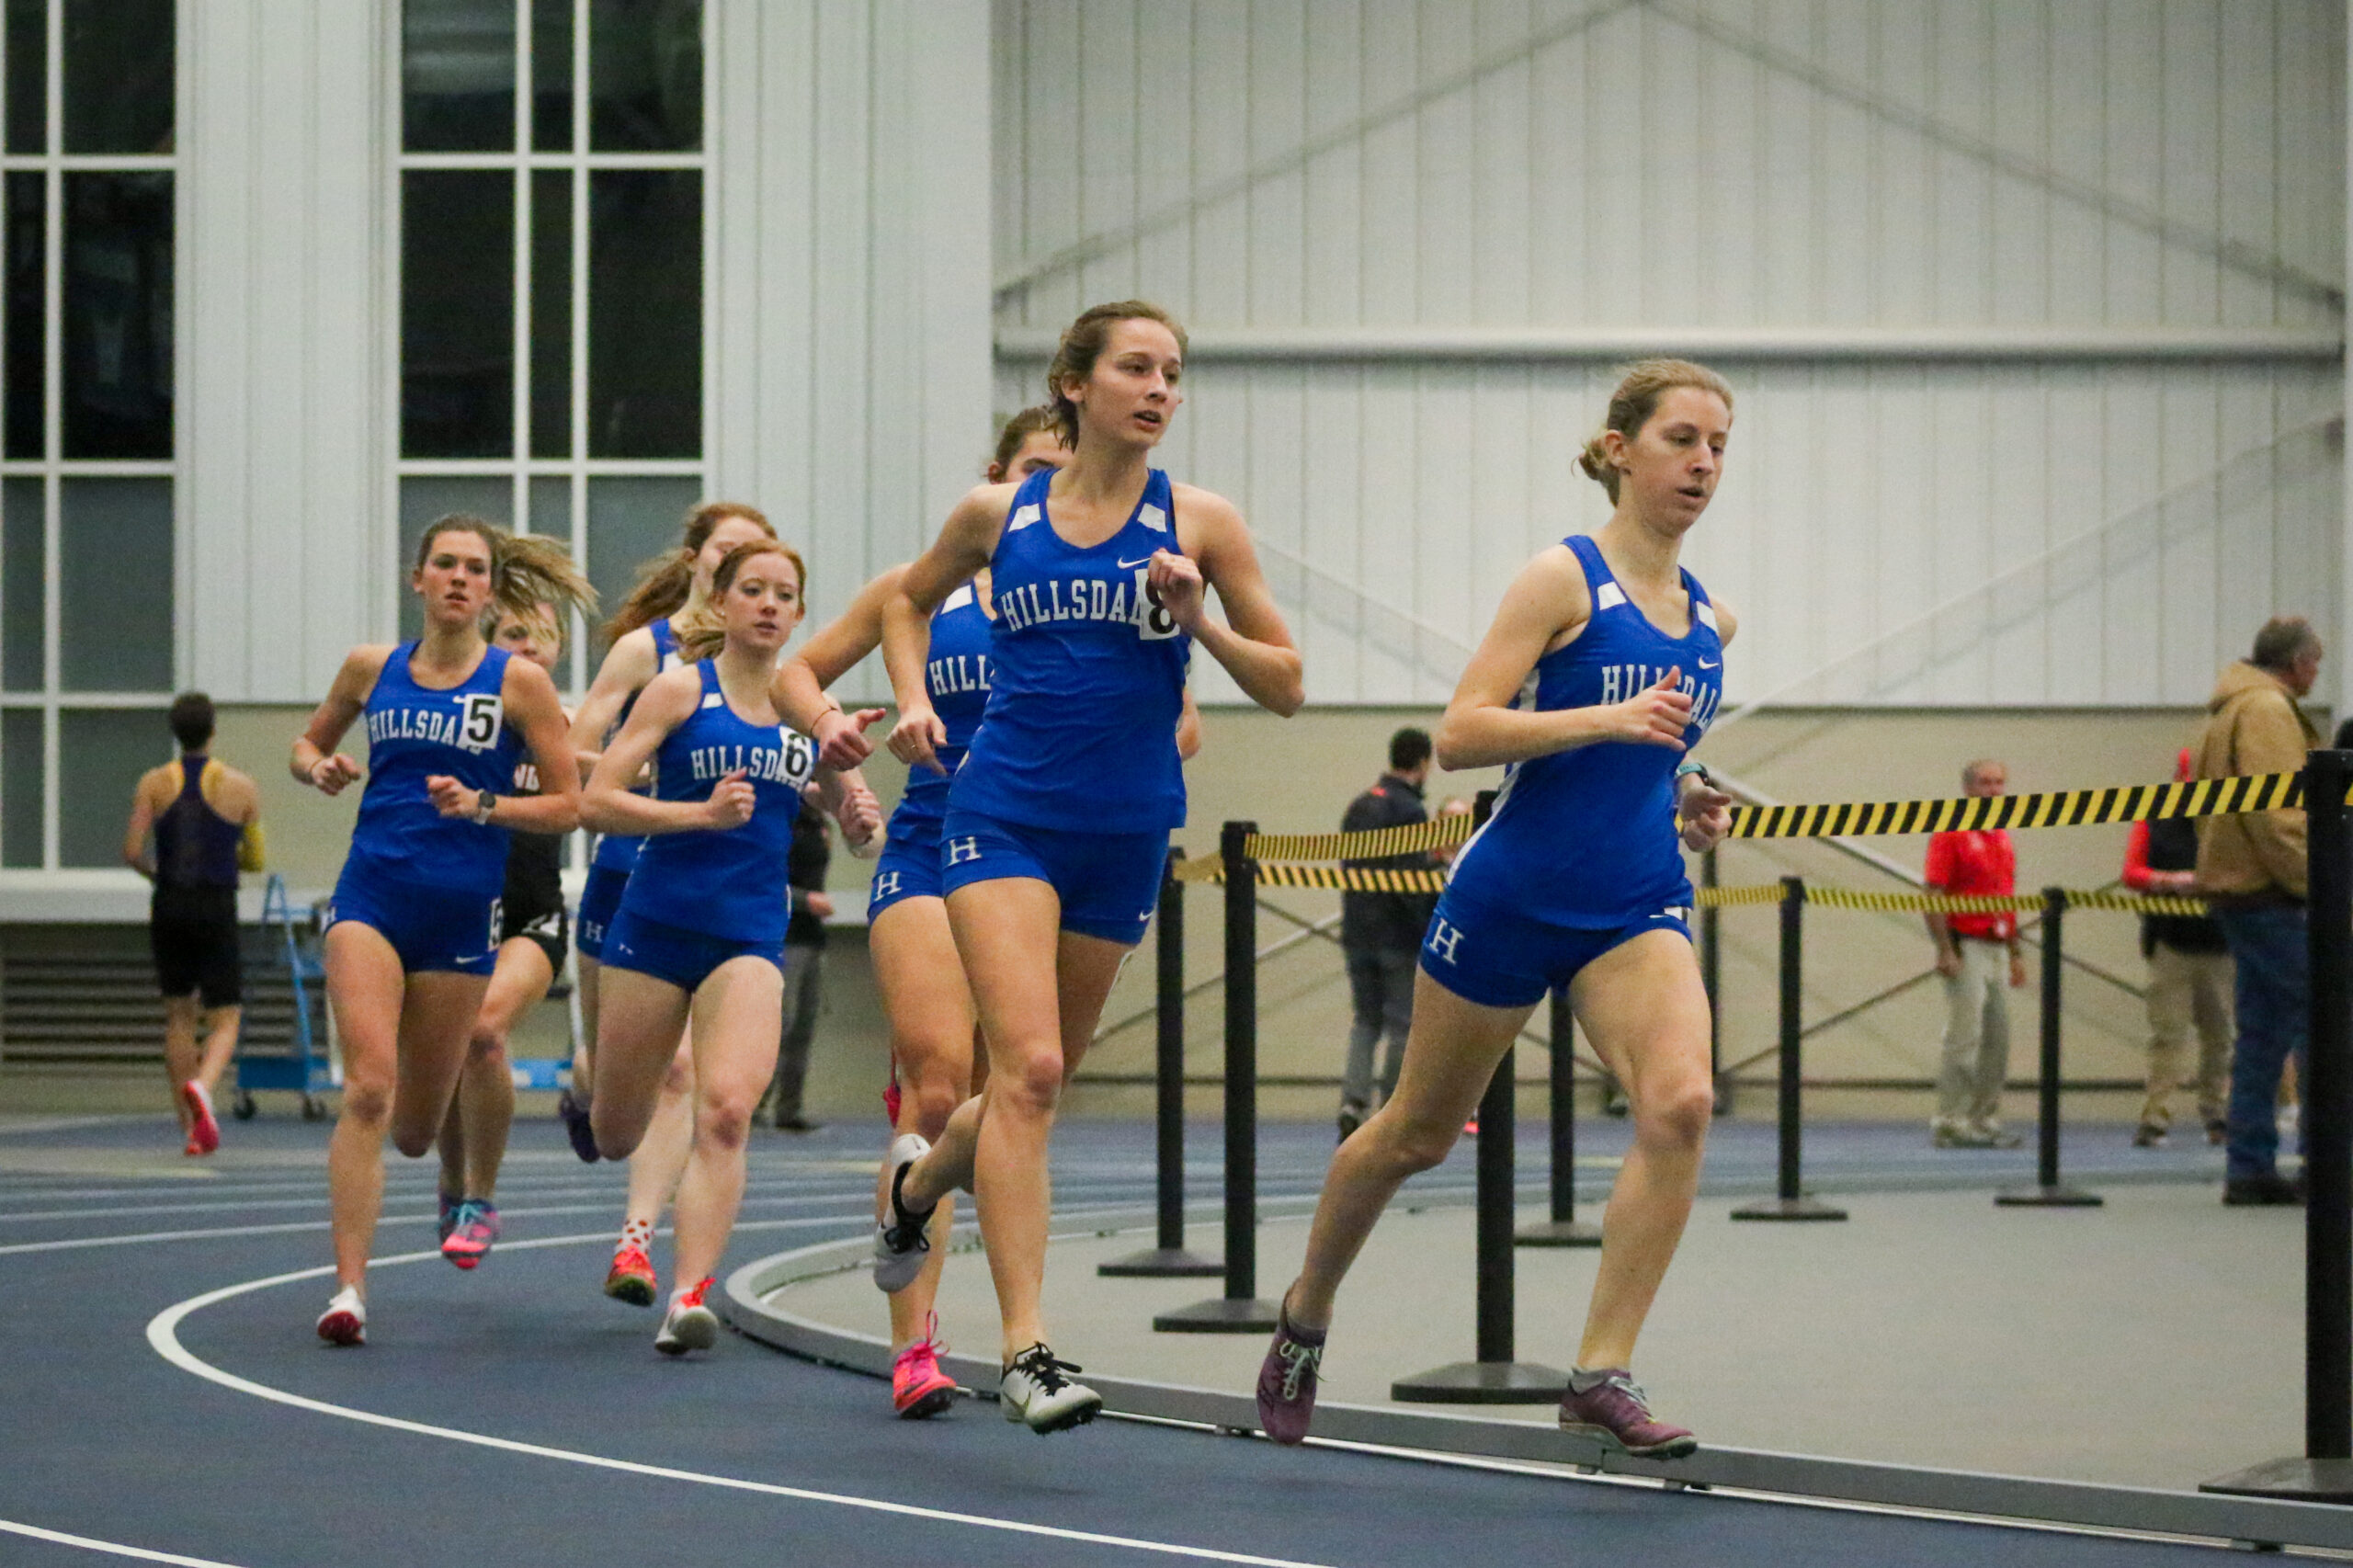 Led by freshmen, women’s track places first in tri-meet